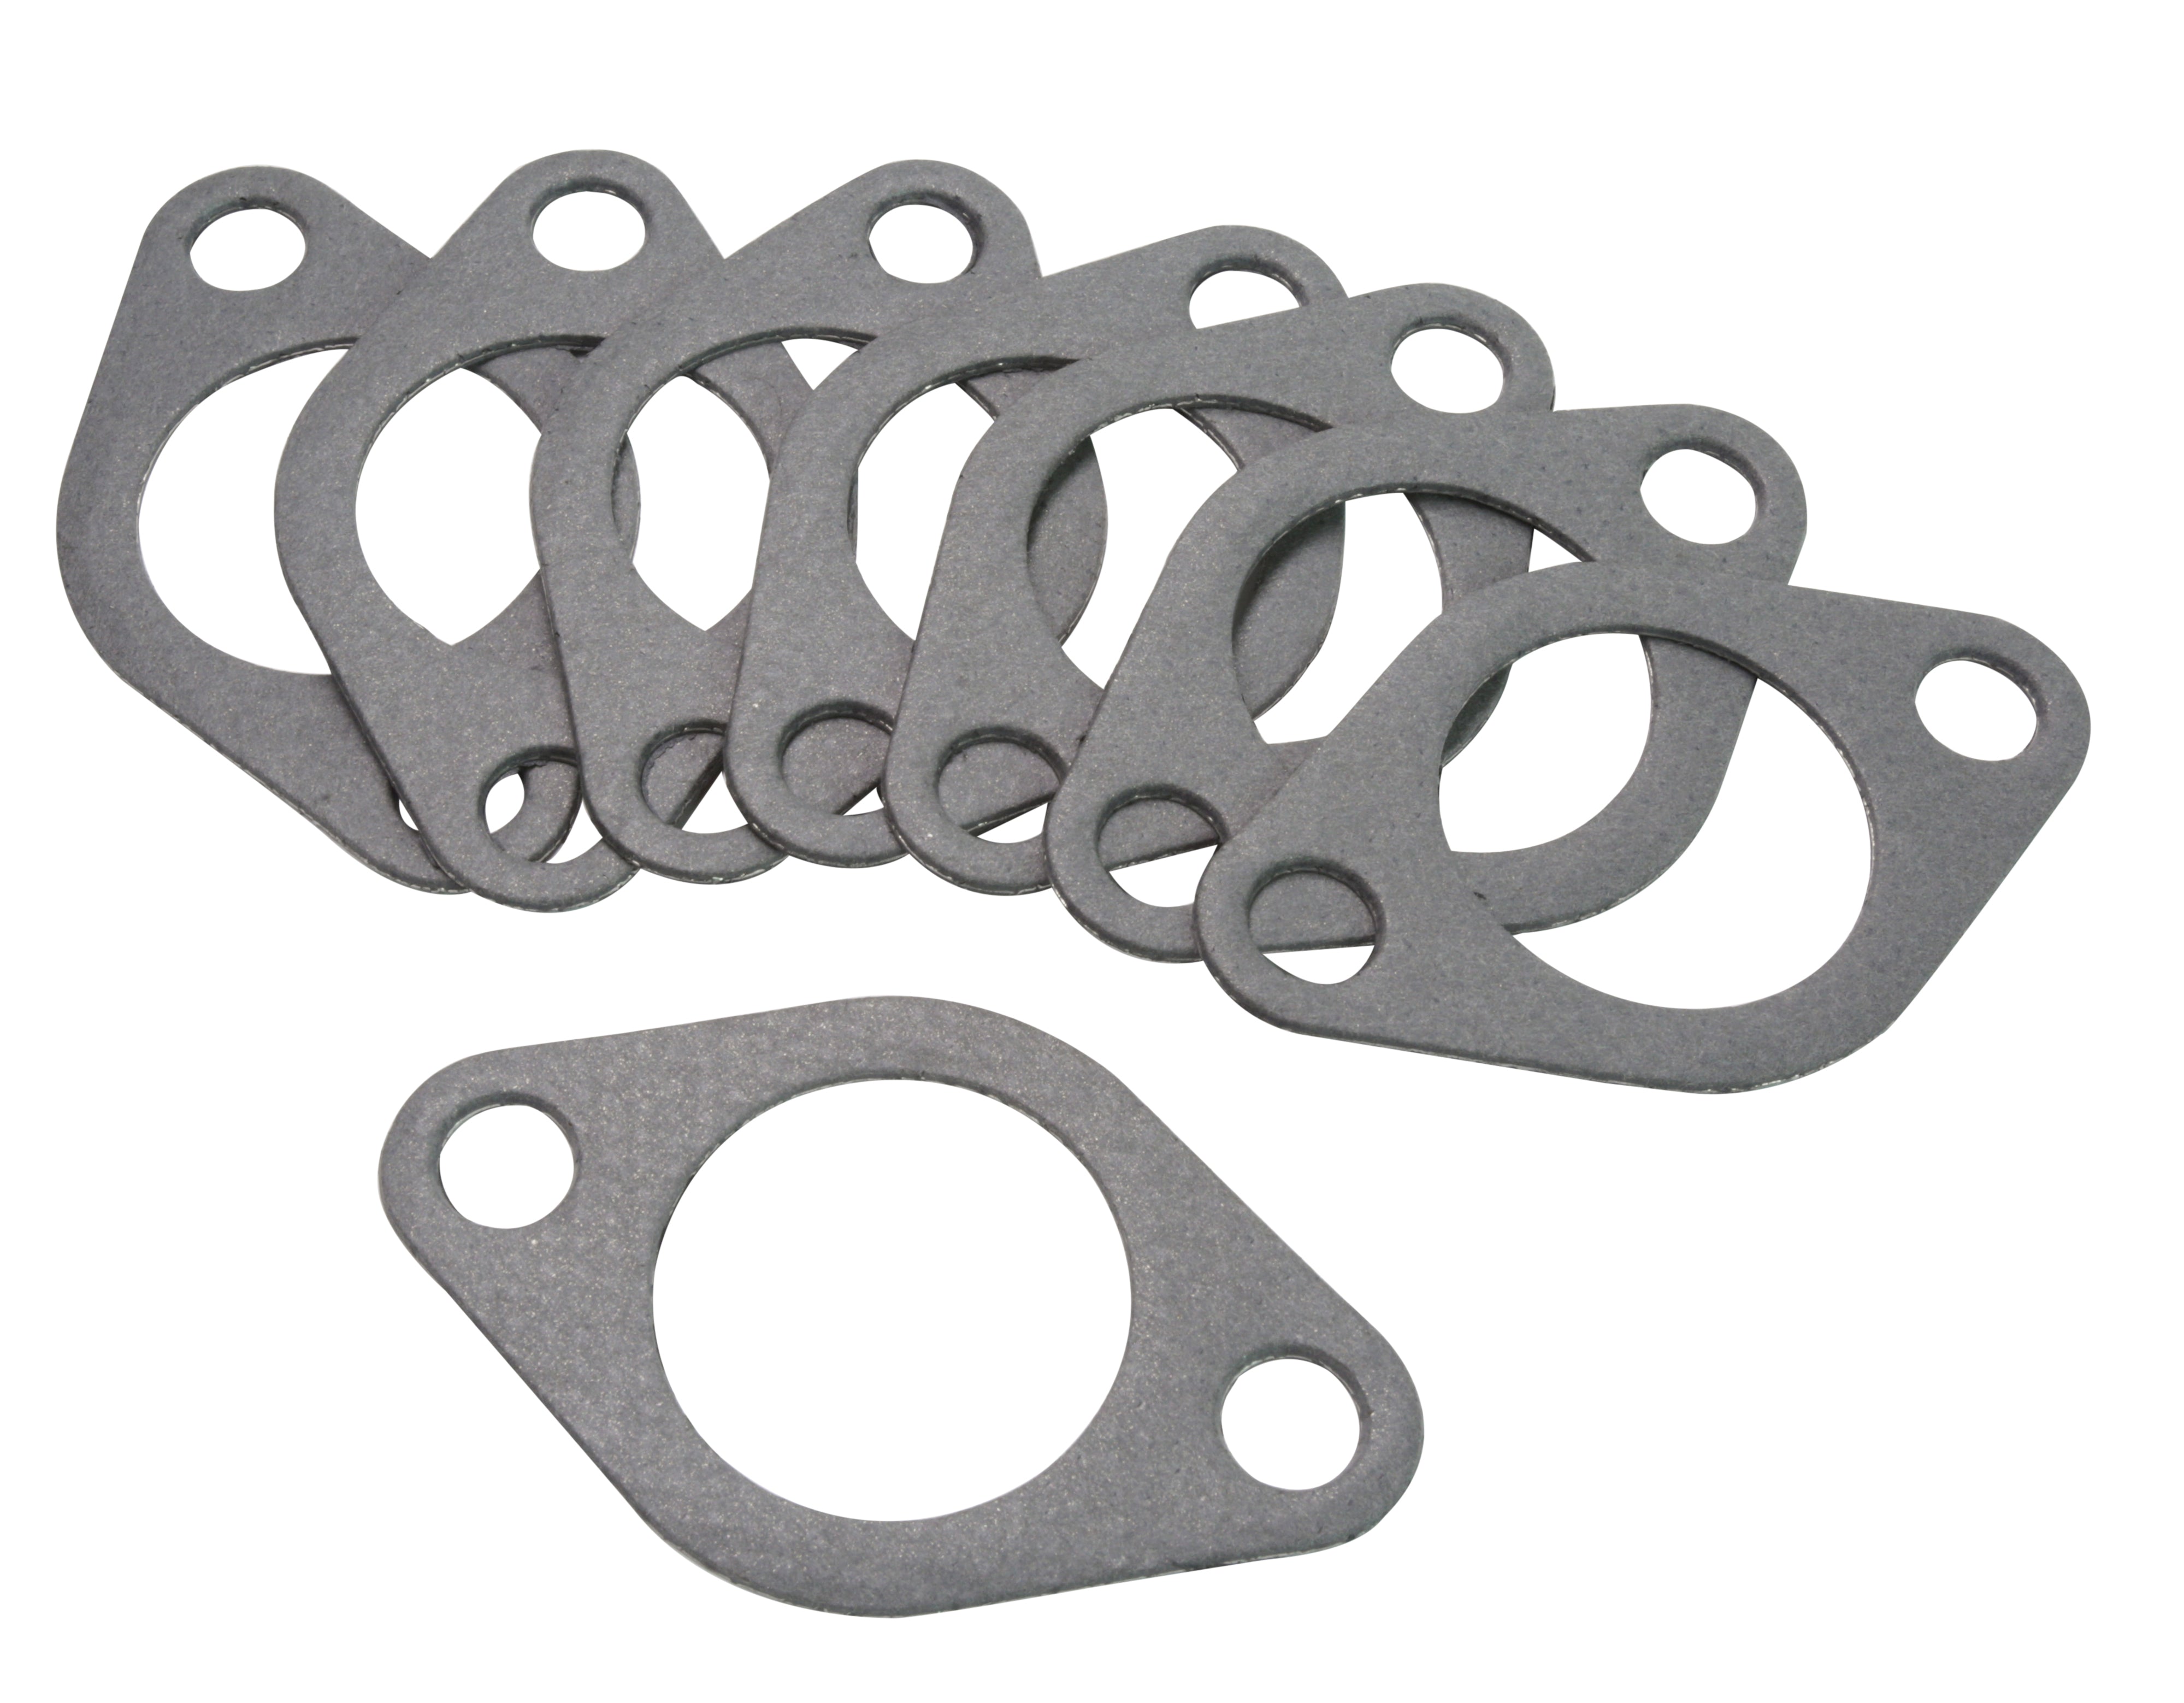 Exhaust Manifold to Block Gasket Set • 1932-53 Ford V-8 (Except 60 HP)